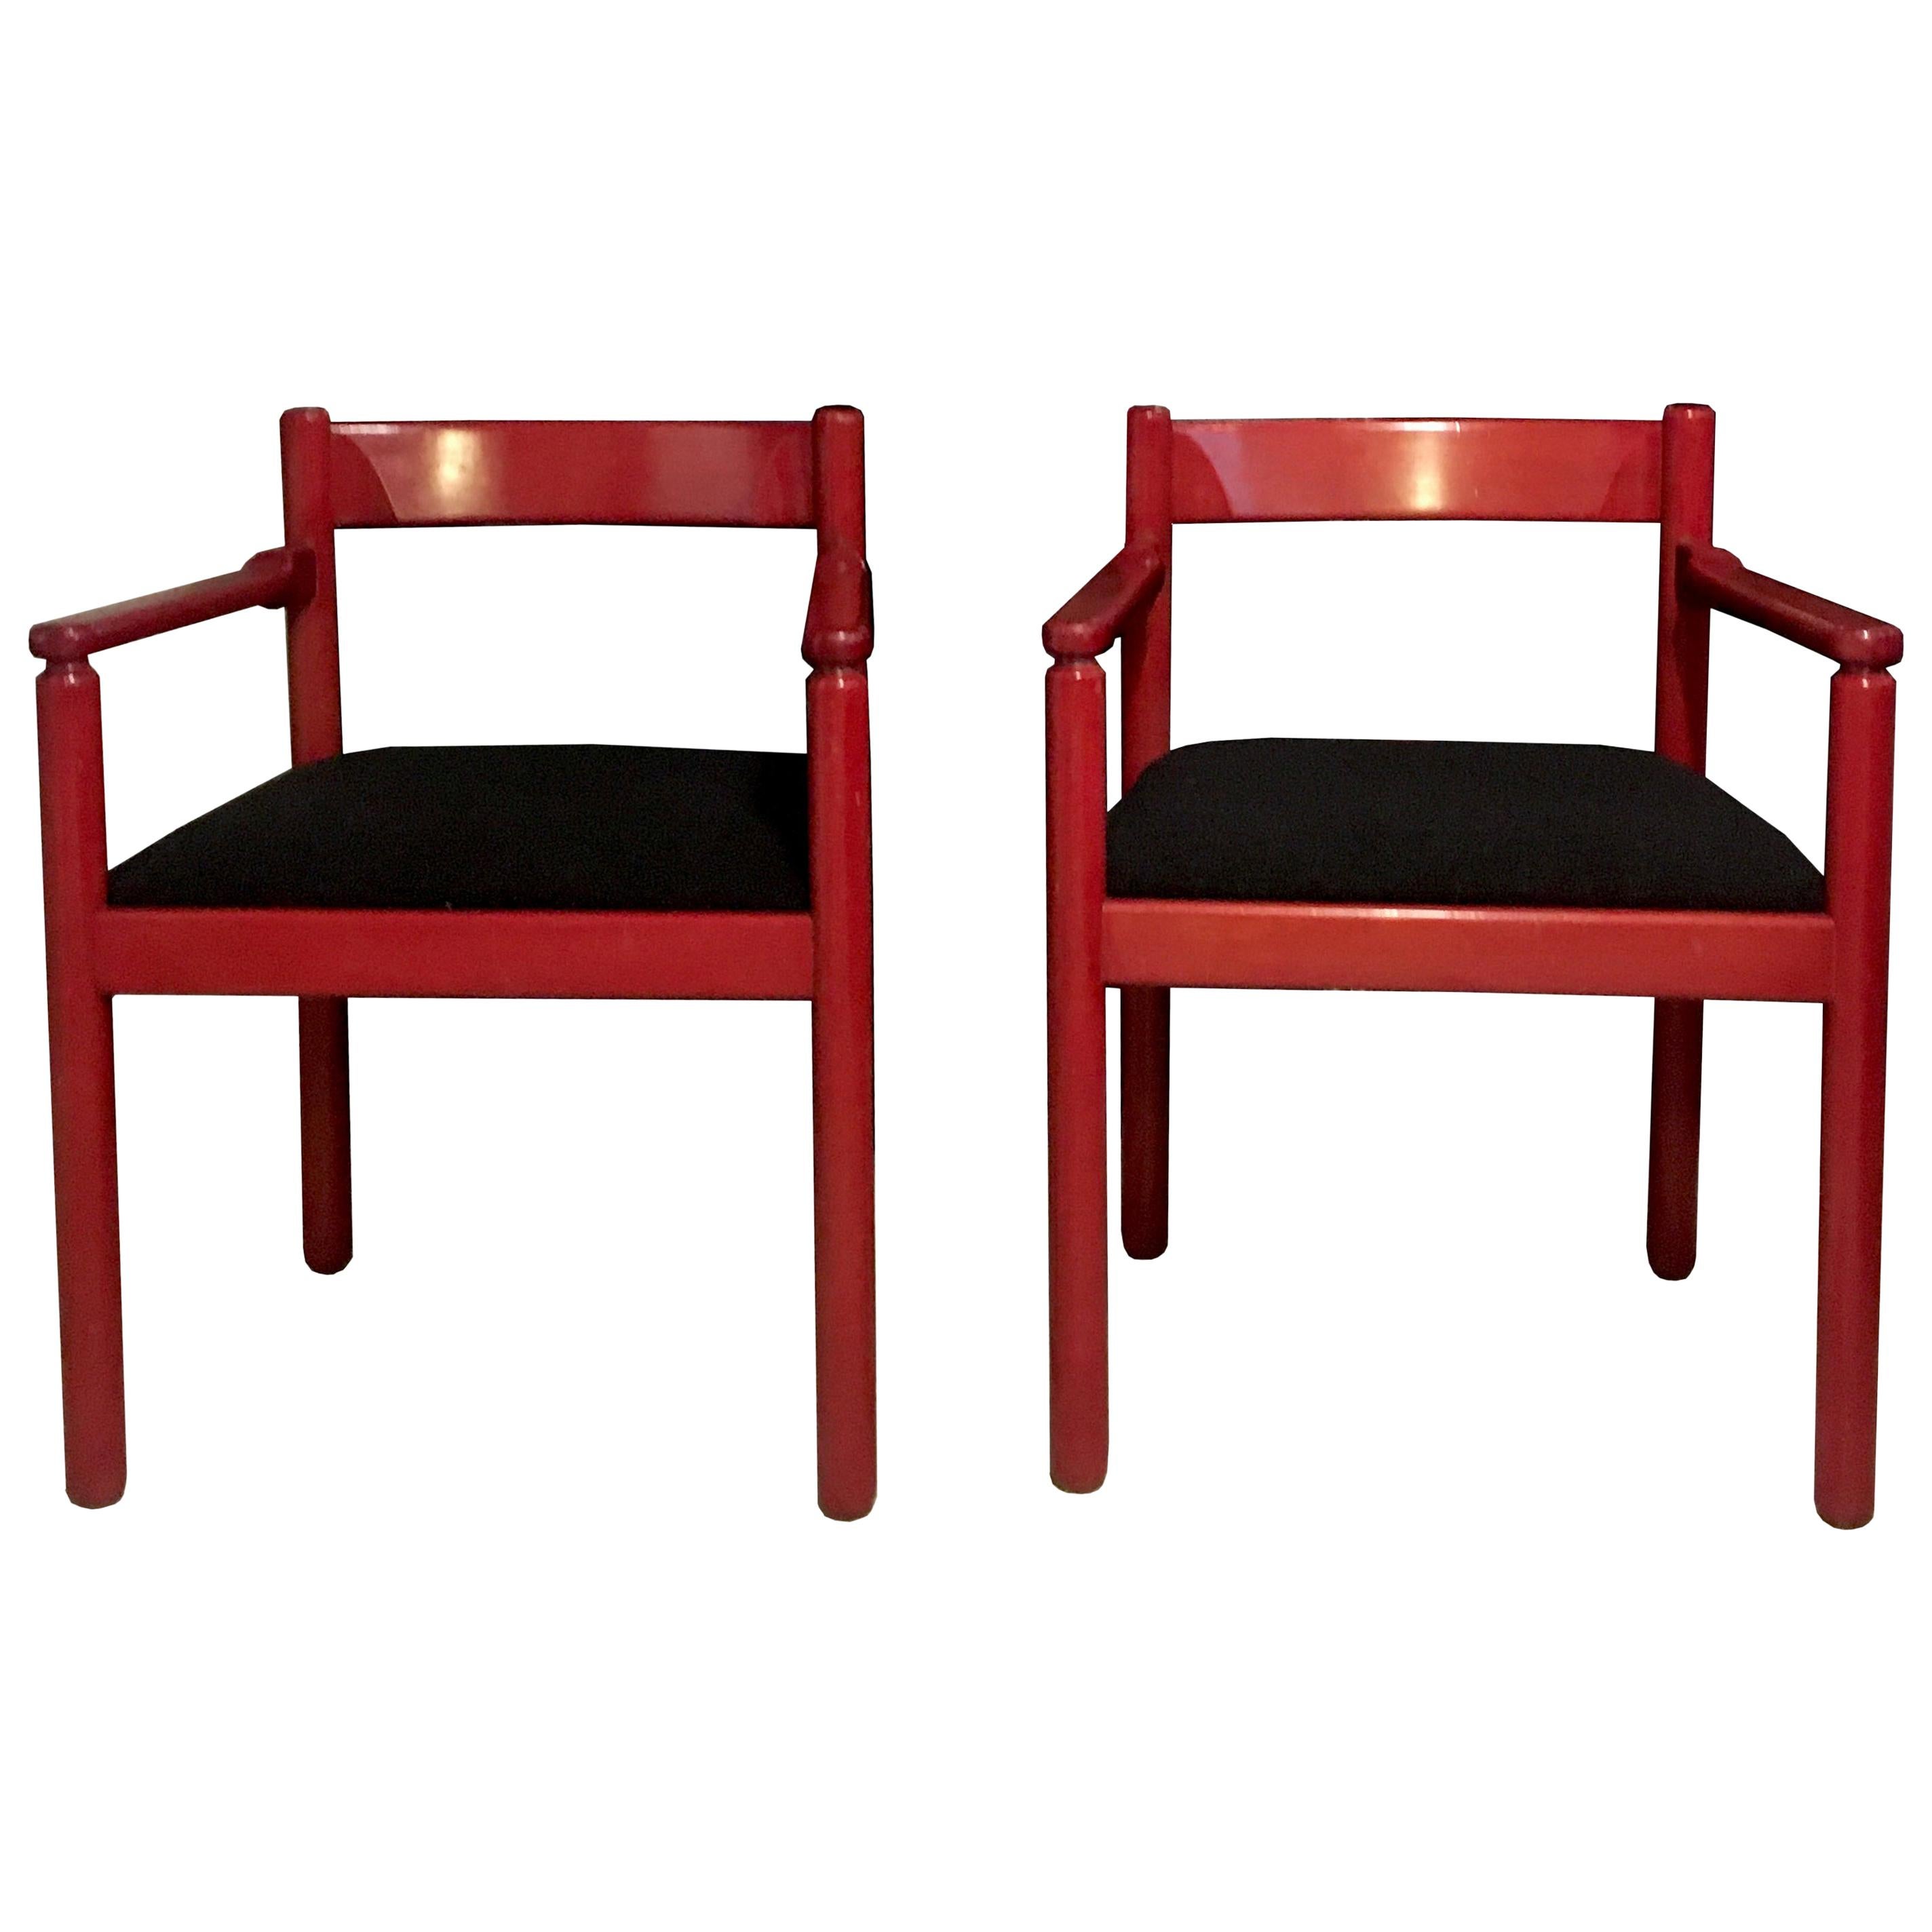 Vico Magistretti Pair of Dining Room Chairs for Cassina